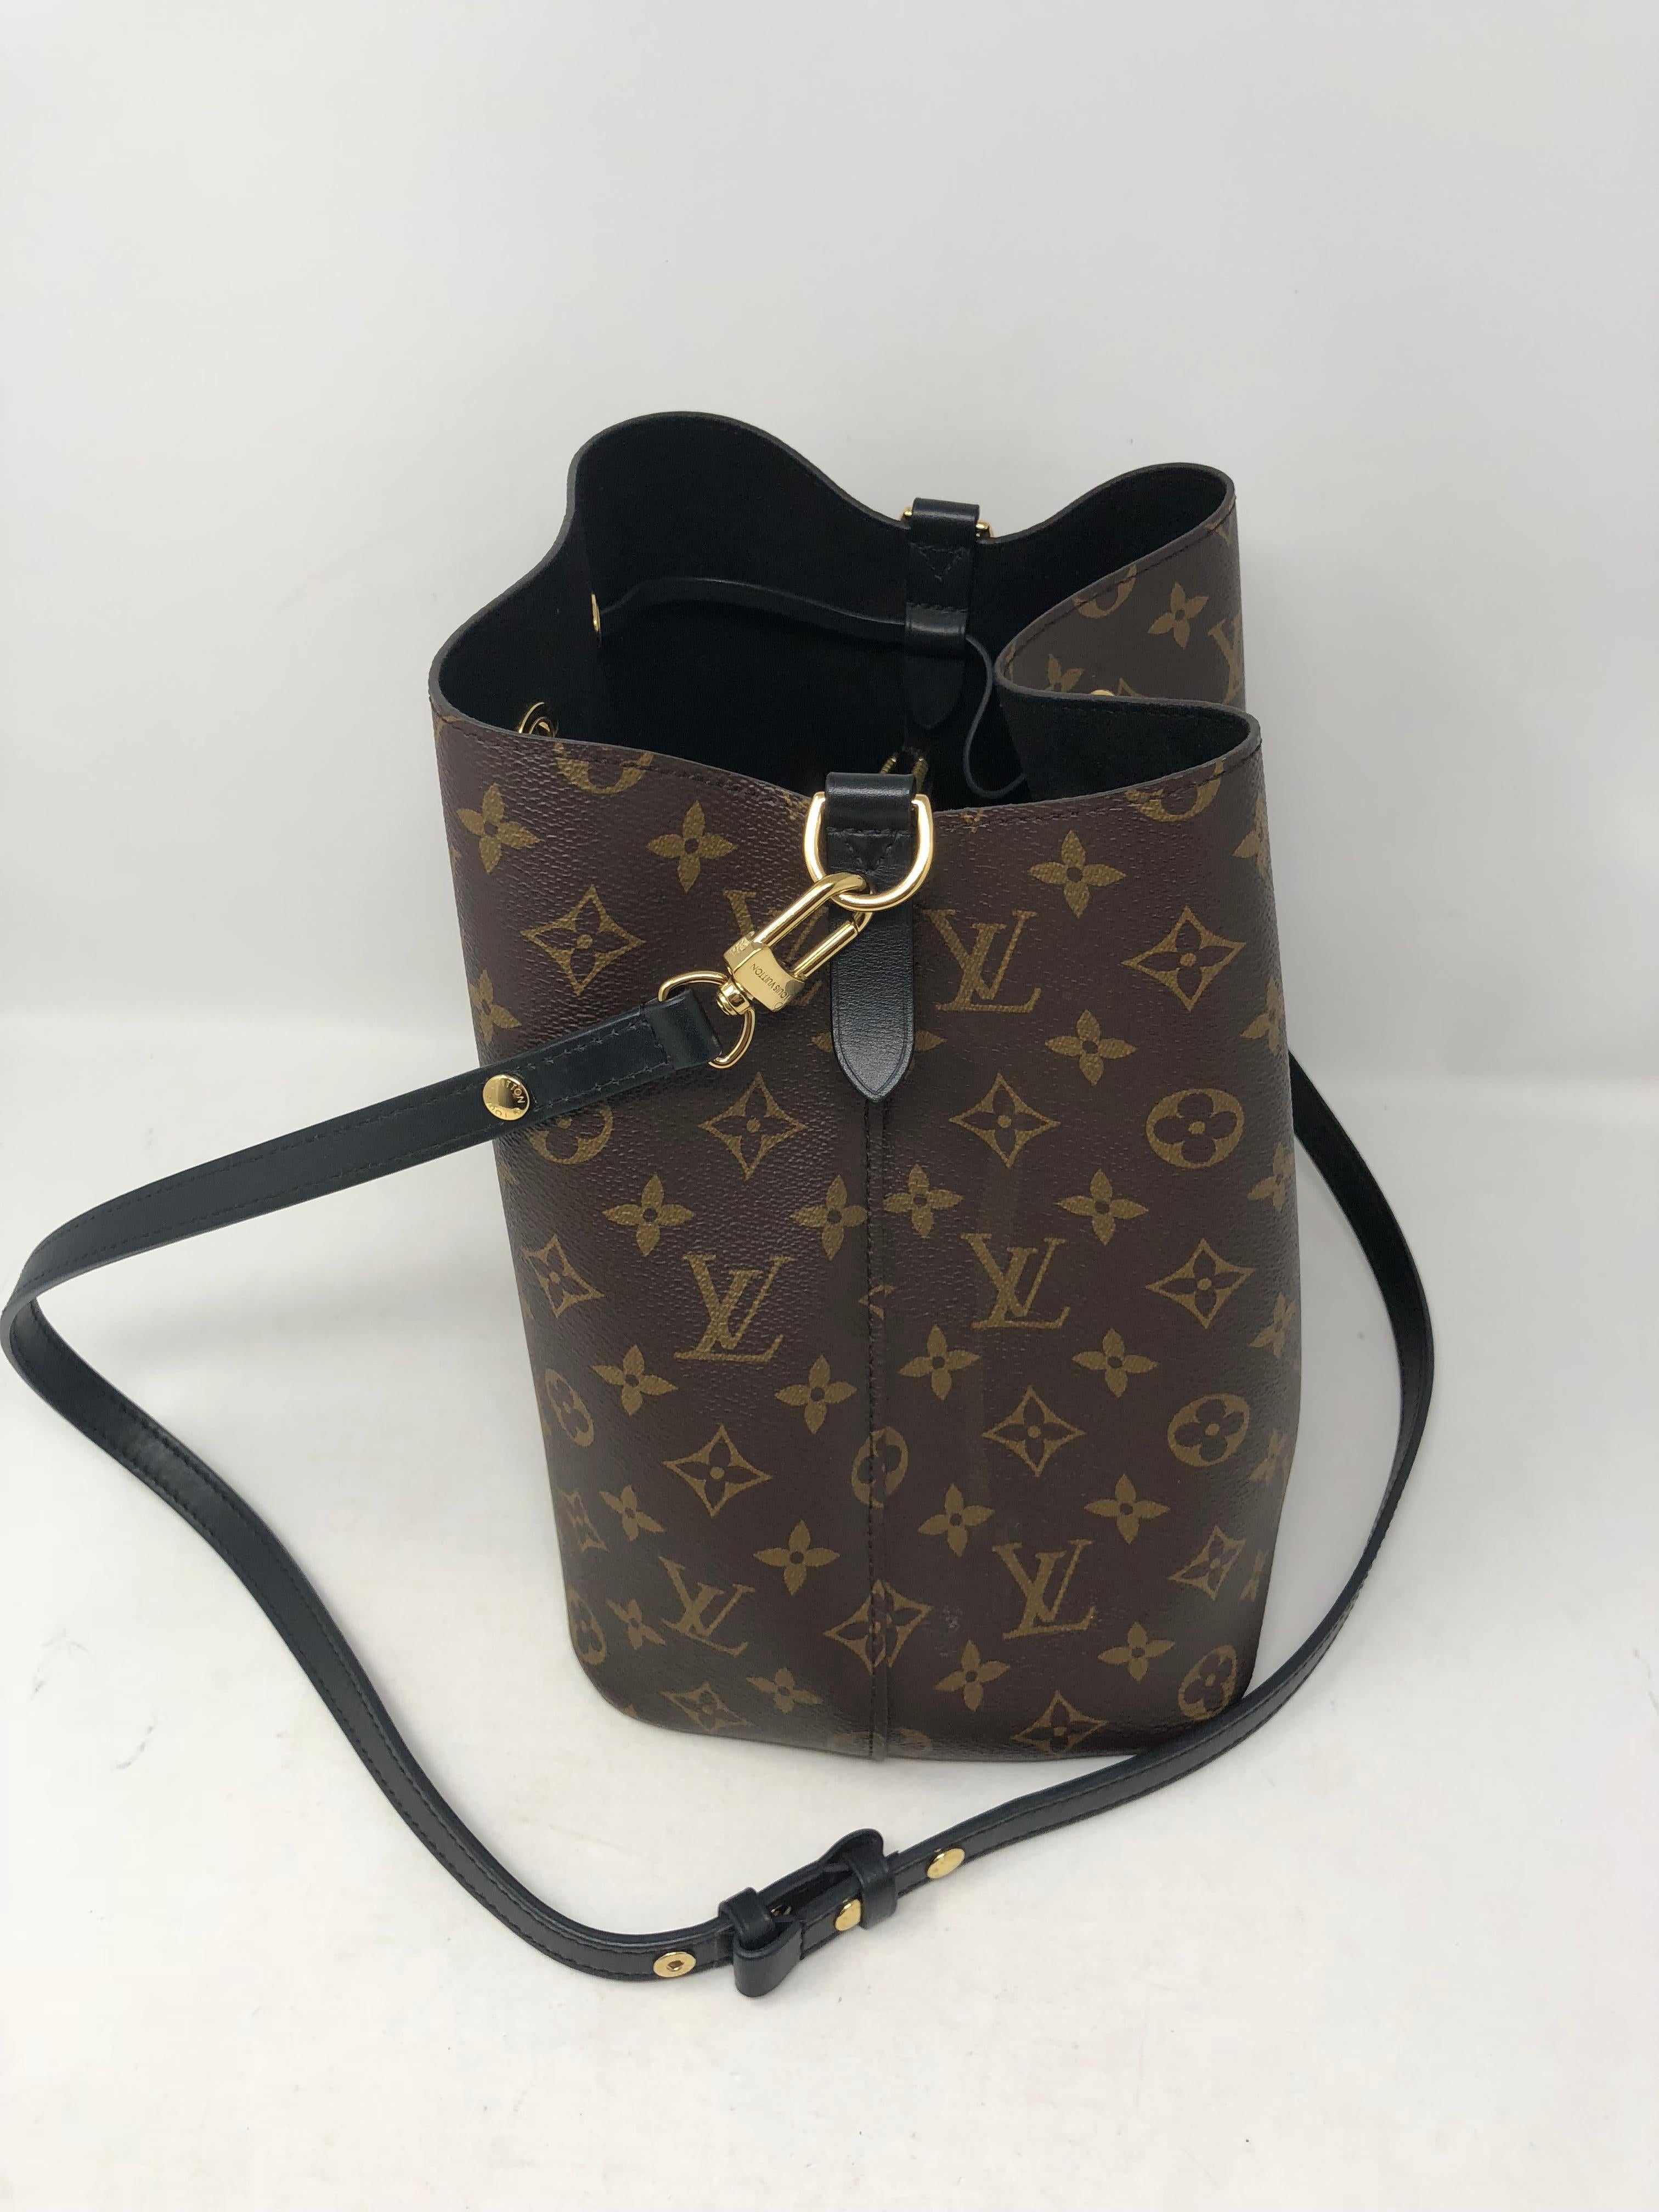 Louis Vuitton Neonoe Black Bag. Classic bucket style shoulder bag is made of coated monogram canvas with black leather details. Black microfiber interior and a nice roomy space to keep all your essentials. Strap is also adjustable and can be worn